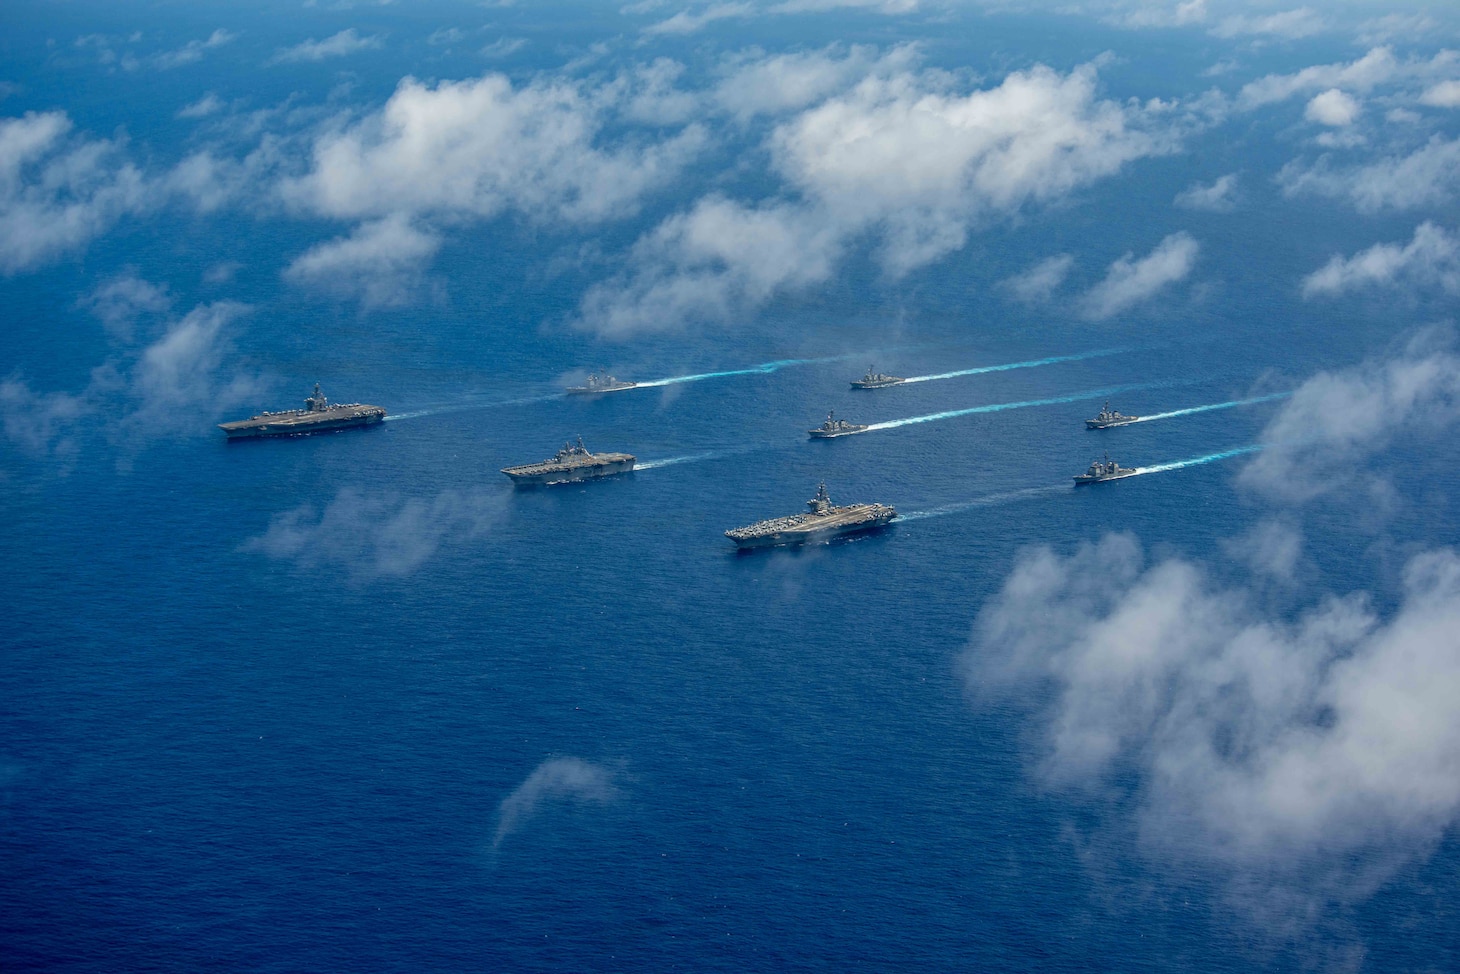 PHILIPPINE SEA (June 12, 2022) The Nimitz-class aircraft carrier USS Abraham Lincoln (CVN 72), front left, America-class amphibious assault ship USS Tripoli (LHA 7), front center, Nimitz-class aircraft carrier USS Ronald Reagan (CVN 76), front right, Ticonderoga-class guided-missile cruiser USS Mobile Bay (CG 53), middle left, Arleigh Burke-class guided-missile destroyer USS Benfold (DDG 65), middle center, Ticonderoga-class guided-missile cruiser USS Antietam (CG 54), middle right, Arleigh Burke-class guided-missile destroyer USS Spruance (DDG 111), back left, and Arleigh Burke-class guided-missile destroyer USS Fitzgerald (DDG 62) sail in formation during Valiant Shield 2022 (VS22). VS22 is a U.S.-only, biennial field training exercise (FTX) focused on integration of joint training in a multi-domain environment. This training builds real-world proficiency in sustaining joint forces through detecting, locating, tracking, and engaging units at sea, in the air, on land, and in cyberspace in response to a range of mission areas. (U.S. Navy photo by Mass Communication Specialist Seaman Aleksandr Freutel)